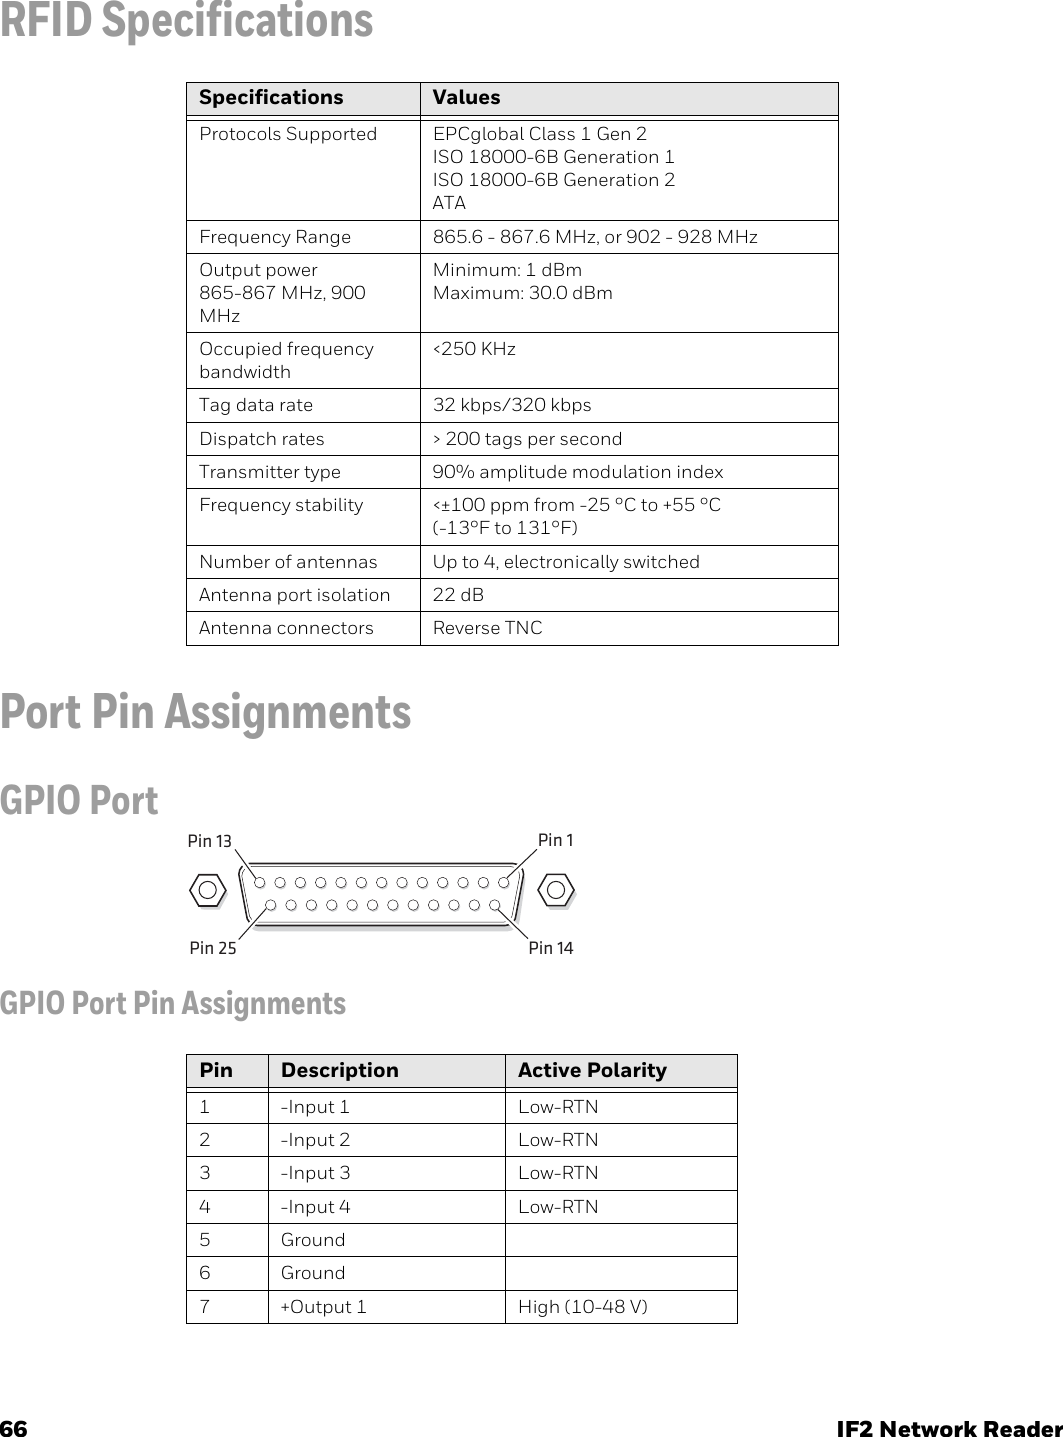 66 IF2 Network ReaderRFID SpecificationsPort Pin AssignmentsGPIO PortGPIO Port Pin Assignments Specifications ValuesProtocols Supported EPCglobal Class 1 Gen 2ISO 18000-6B Generation 1ISO 18000-6B Generation 2ATAFrequency Range 865.6 - 867.6 MHz, or 902 - 928 MHzOutput power865-867 MHz, 900 MHzMinimum: 1 dBmMaximum: 30.0 dBmOccupied frequency bandwidth&lt;250 KHzTag data rate 32 kbps/320 kbpsDispatch rates &gt; 200 tags per secondTransmitter type 90% amplitude modulation indexFrequency stability &lt;±100 ppm from -25 °C to +55 °C(-13°F to 131°F)Number of antennas Up to 4, electronically switchedAntenna port isolation 22 dBAntenna connectors Reverse TNCPin 1Pin 13Pin 25 Pin 14Pin  Description Active Polarity1-Input 1 Low-RTN2-Input 2 Low-RTN3-Input 3 Low-RTN4-Input 4 Low-RTN5 Ground6 Ground7+Output 1 High (10-48 V)